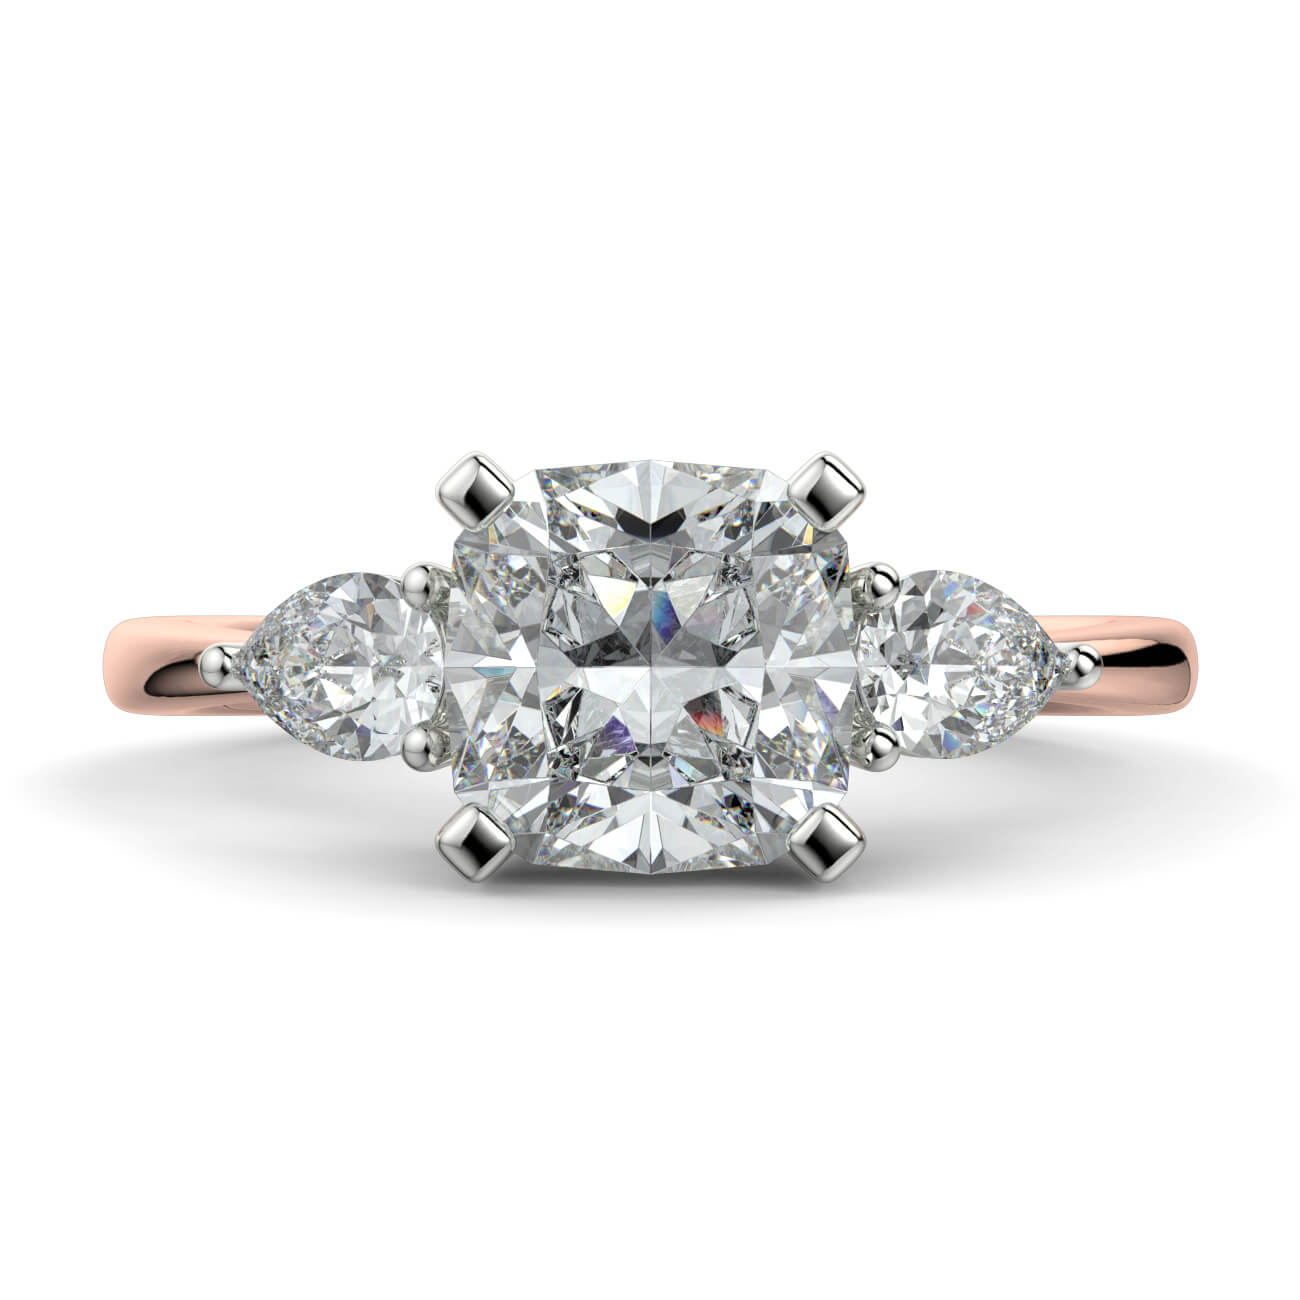 Cushion Cut Diamond Ring With Pear Shape Side Diamonds In Rose and White Gold – Australian Diamond Network